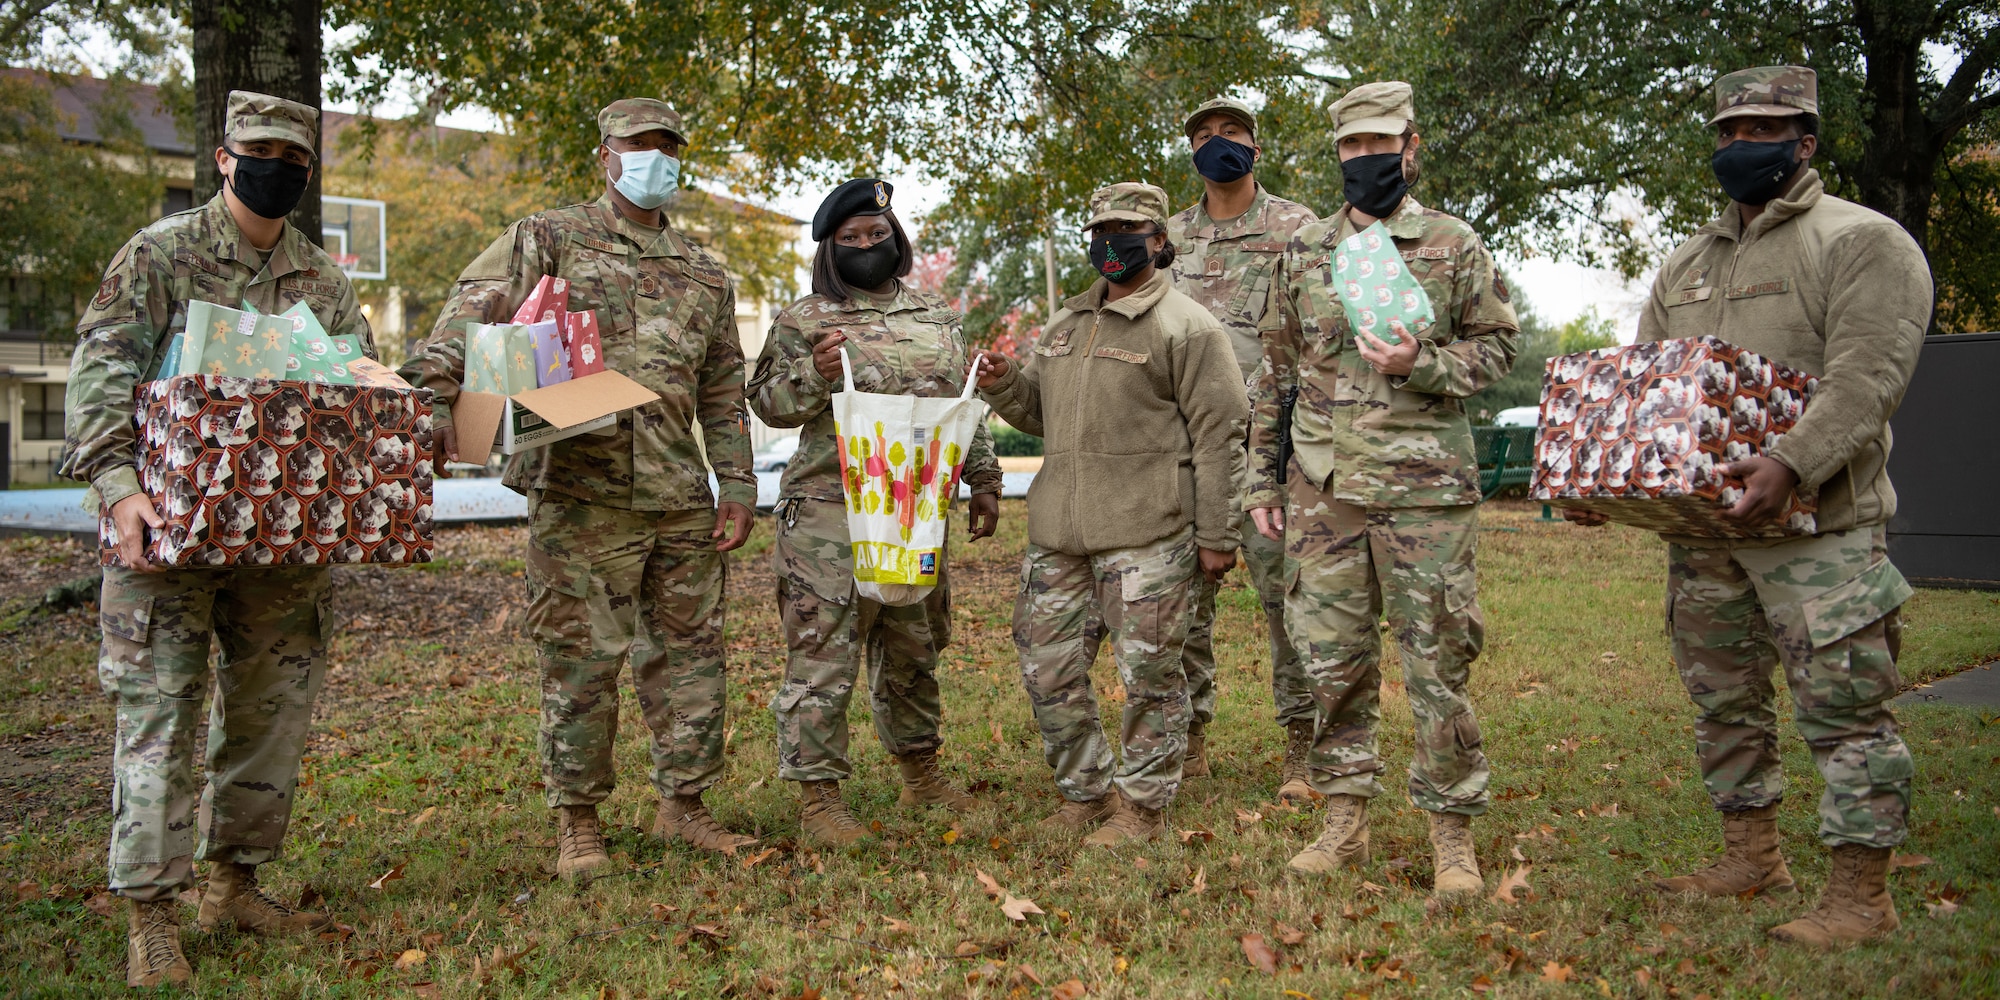 A team of master sergeants pose at the enlisted dormitories after delivering cookies to Airmen Dec. 16, 2020, on Maxwell Air Force Base, Alabama. The team wore masks and delivered the cookies in packaging to reduce the risks of COVID-19 transmission and to maintain safety.